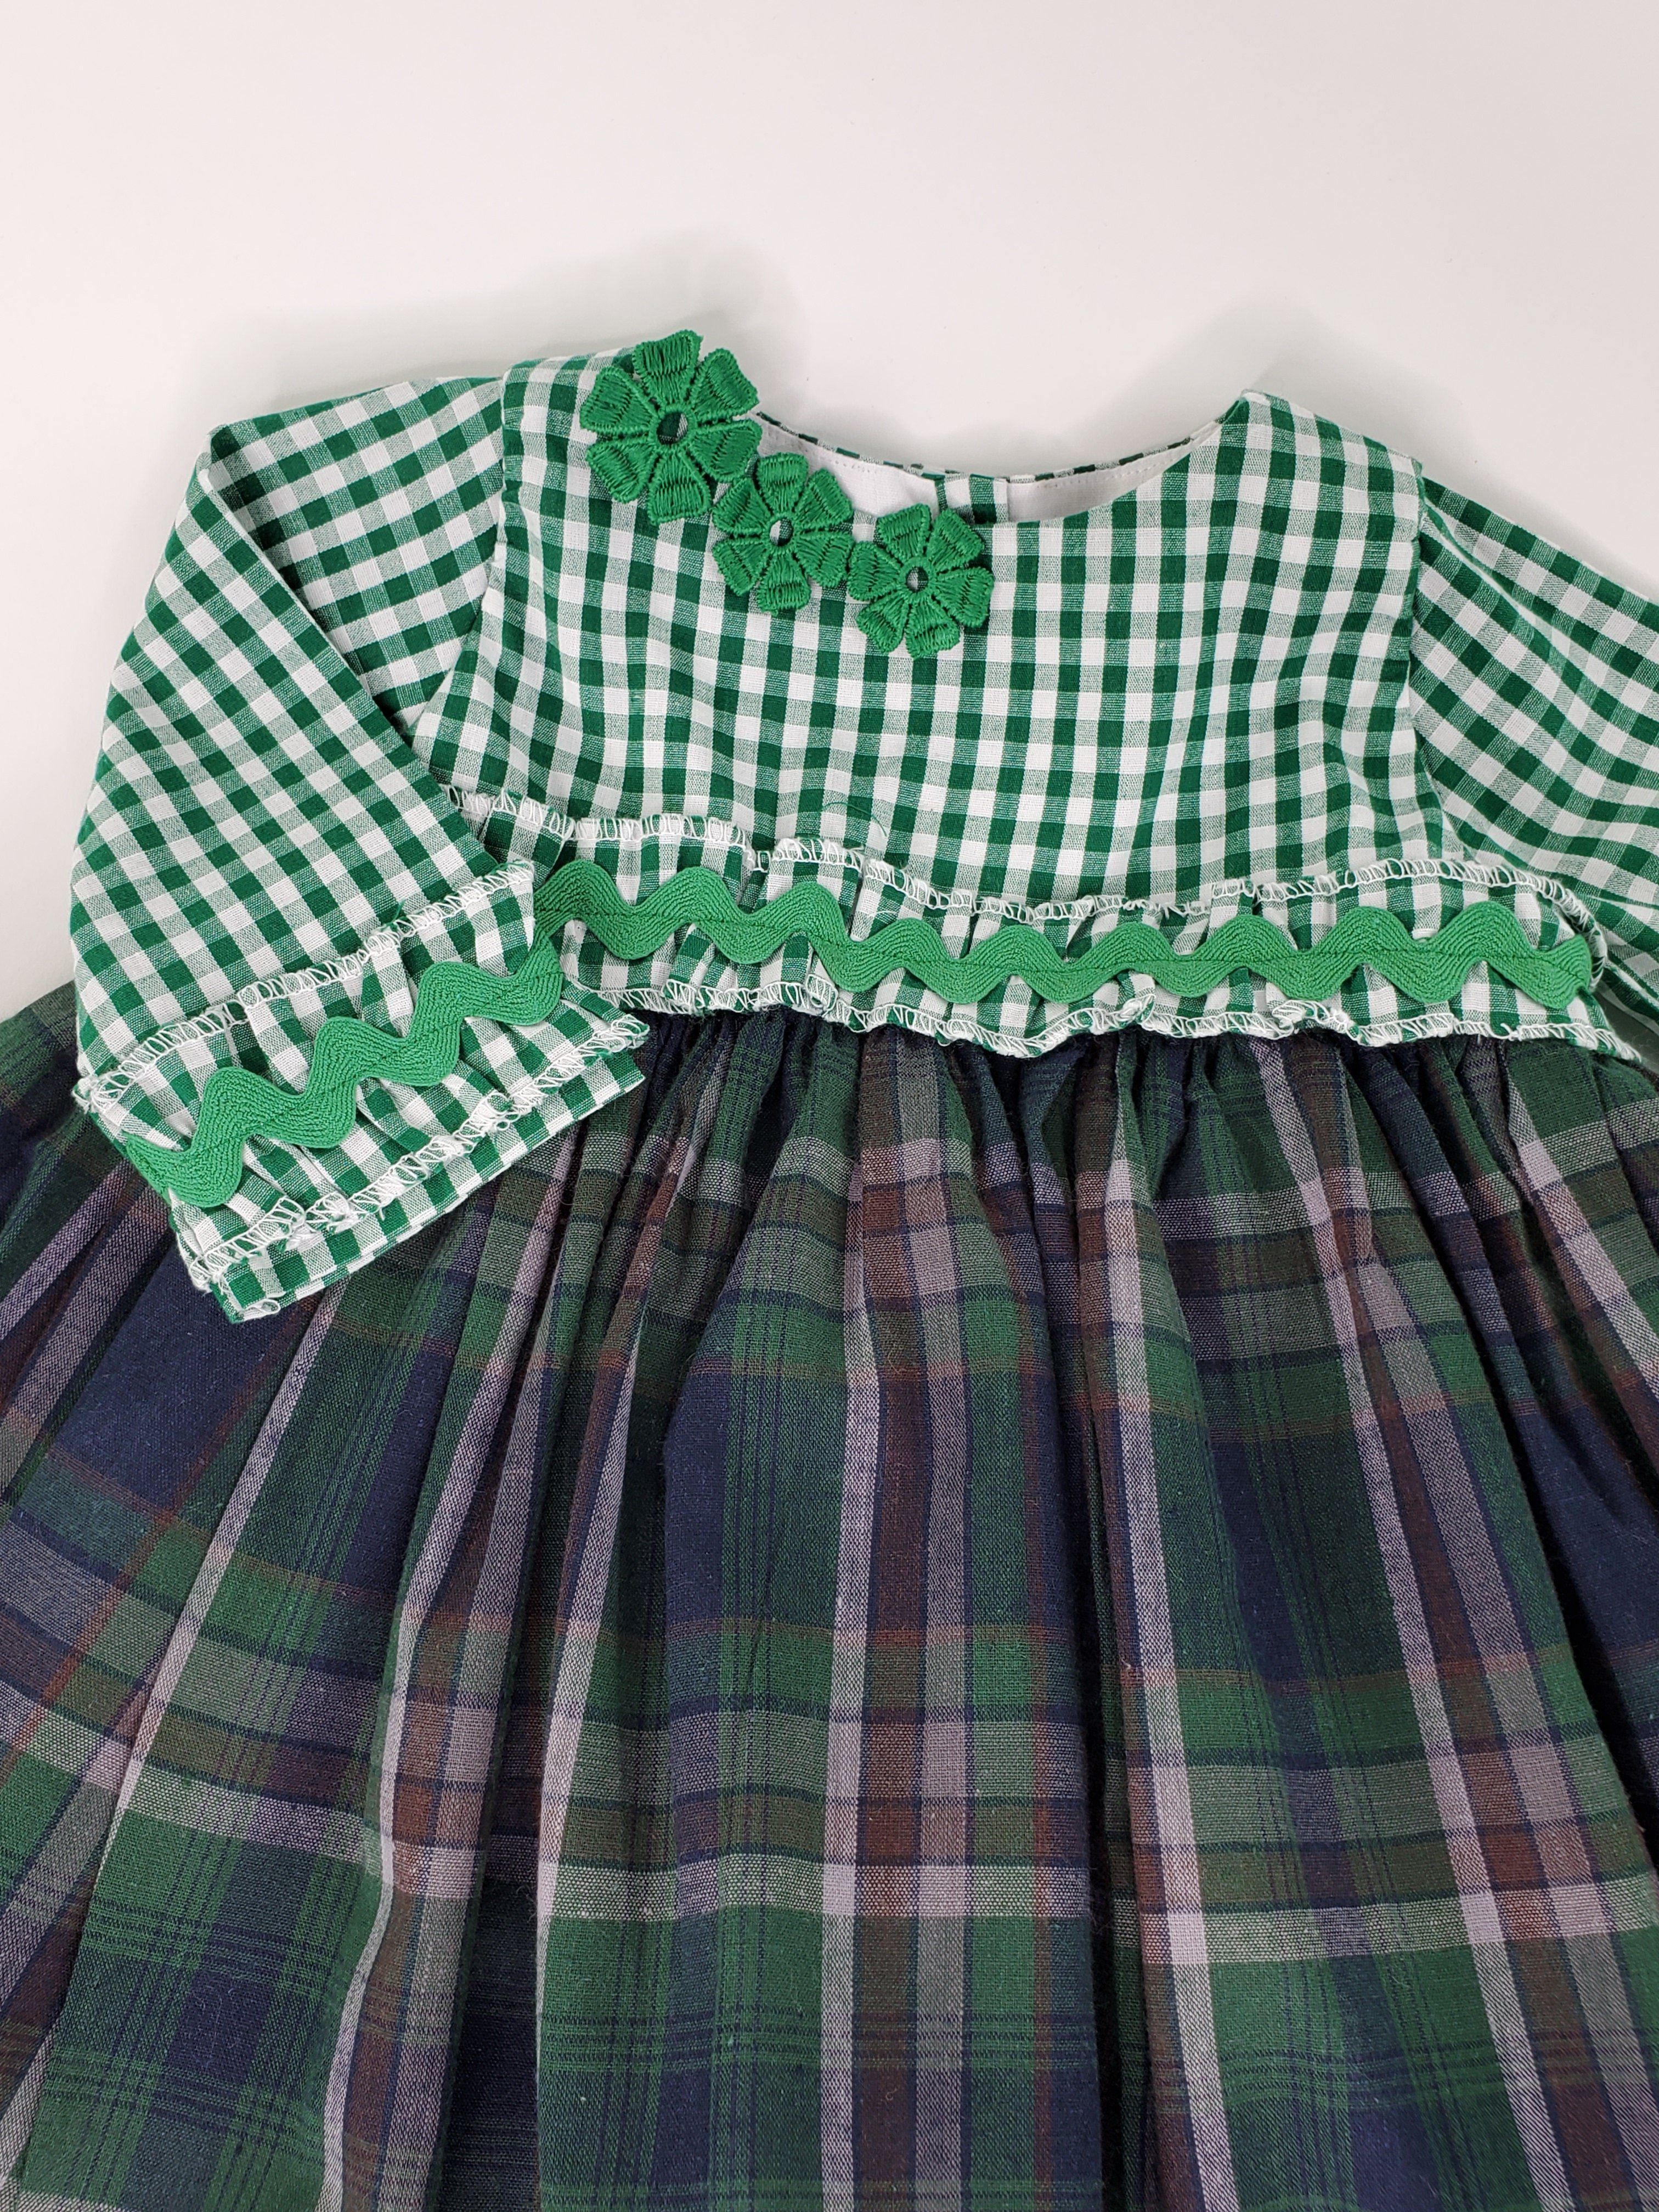 Empire Waist Long Sleeve Check and Plaid Girl's Dress & Bloomers Set-Children's Clothing Store Dress & Bloomers Set Alfa Baby Boutique 